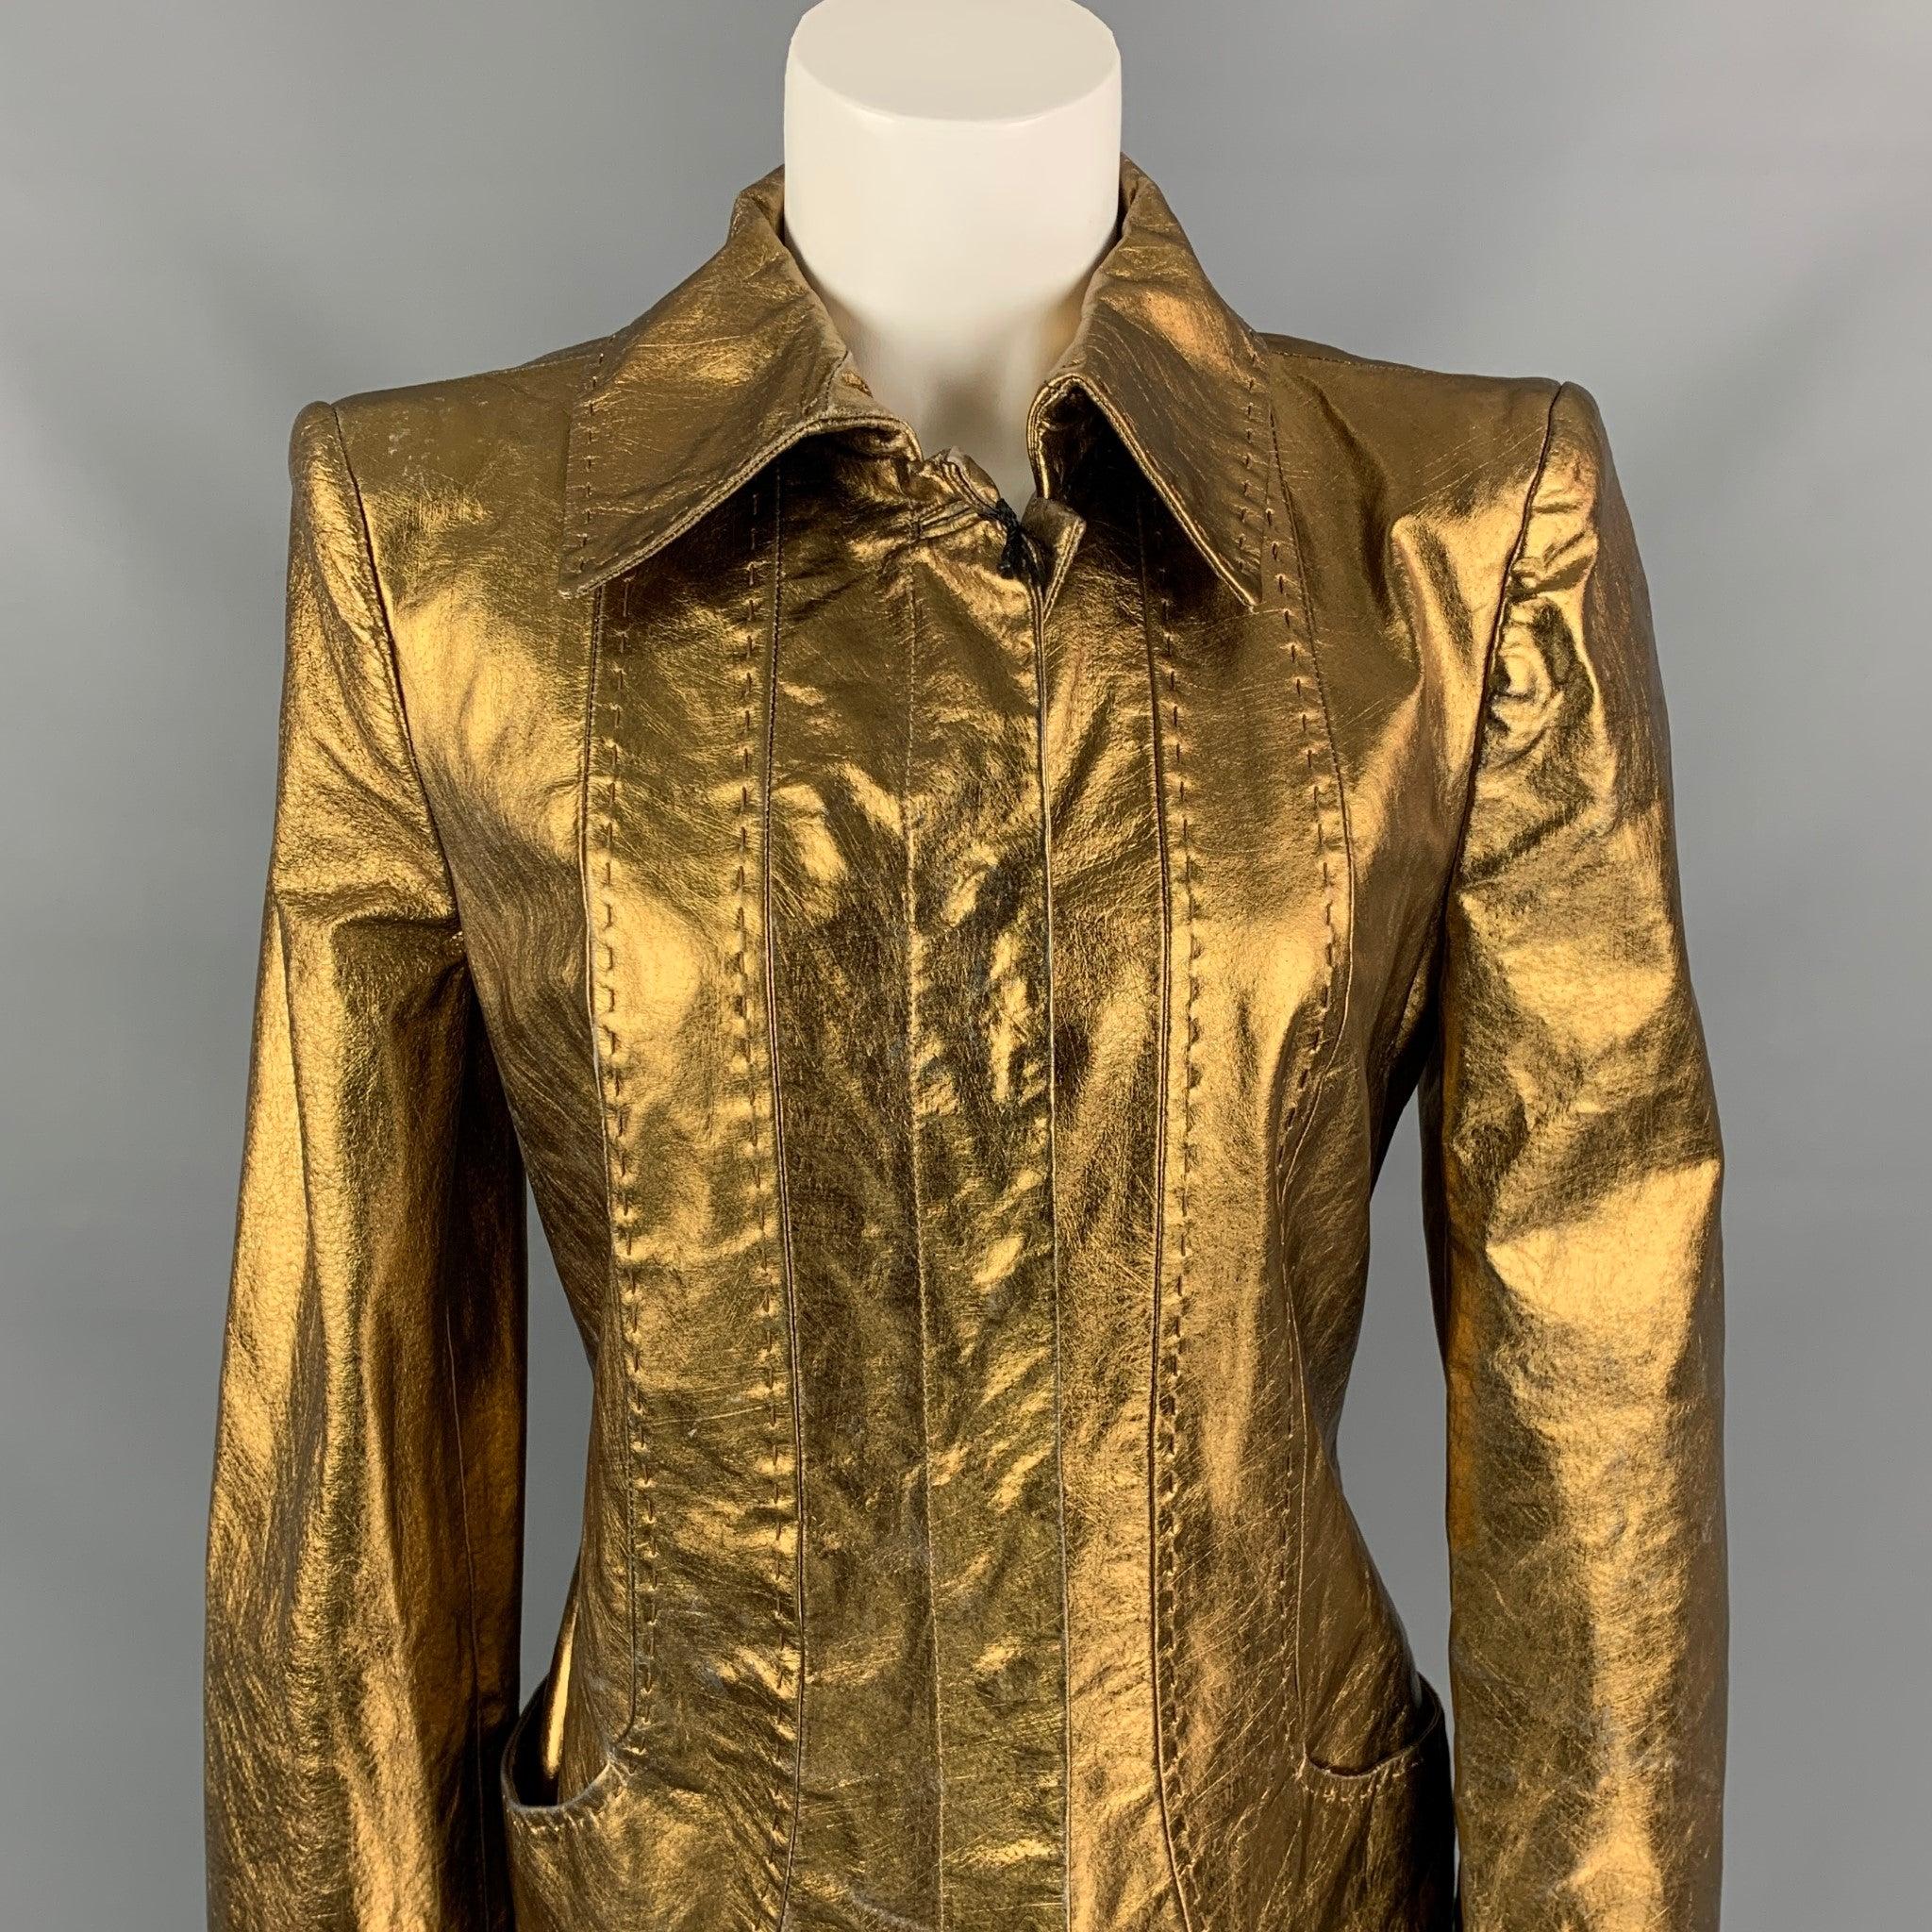 JUST CAVALLI coat comes in a bronze metallic leather featuring a full liner, top stitching, slit pockets, spread collar, back strap, and
 hidden snap button closure. Includes tags. Made in Italy.Very Good Pre-Owned Condition. 

Marked:  40